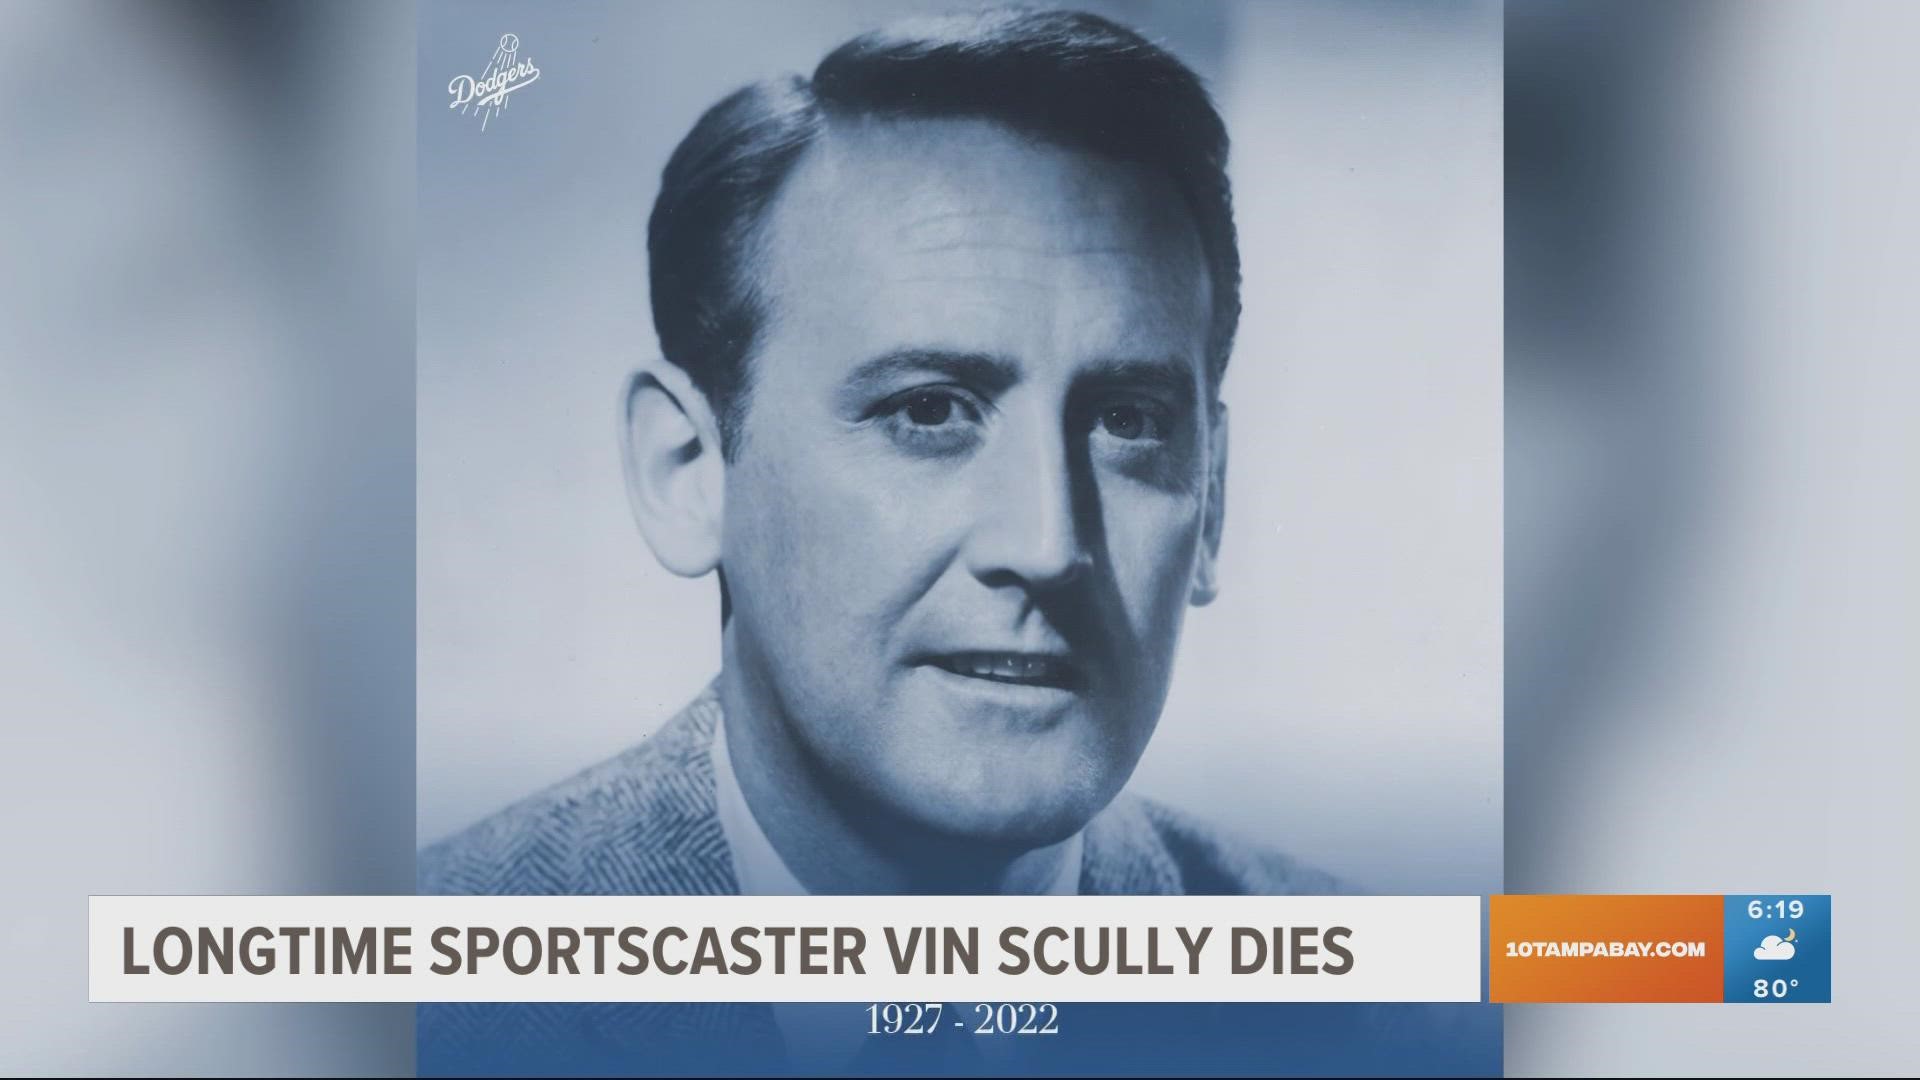 LA Dodgers Vin Scully Forever The Voice Of Dodgers 1927-2022